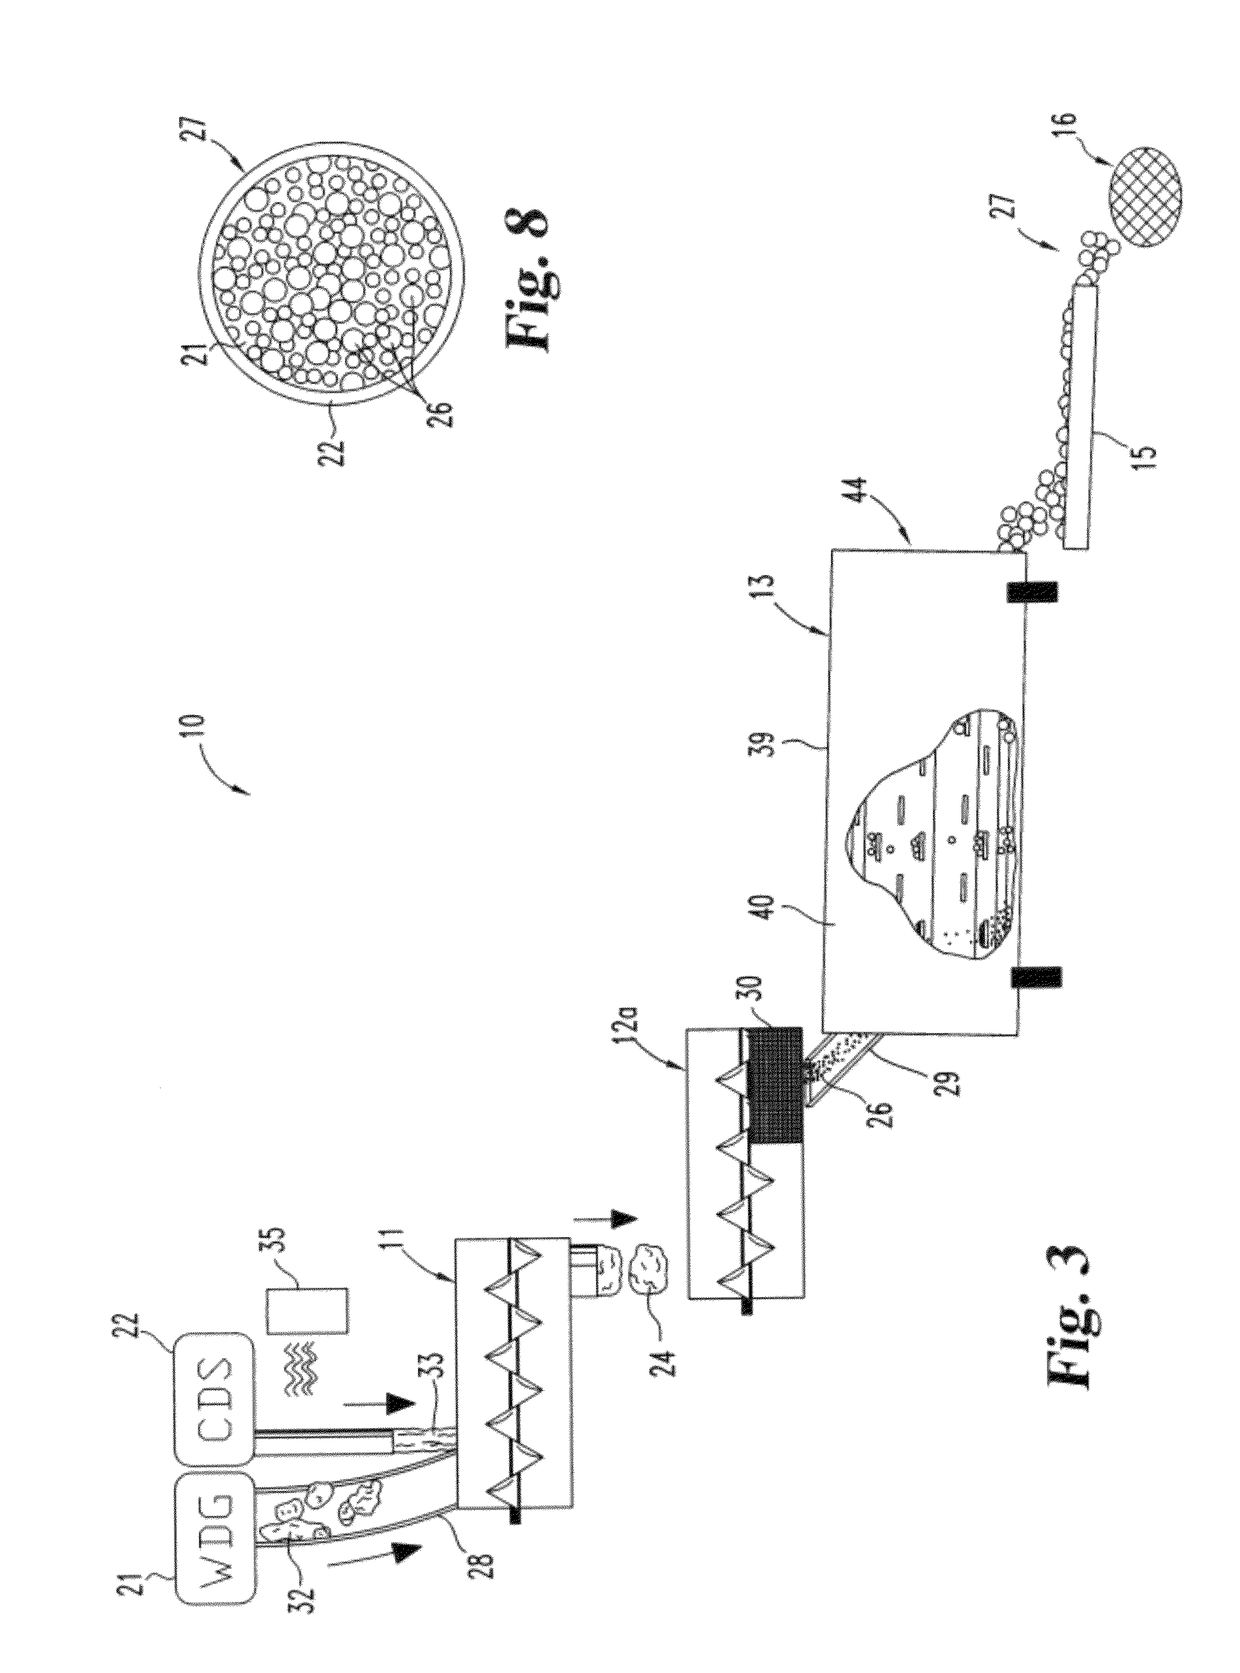 Method and apparatus for producing biobased carriers from byproducts of biomass processing